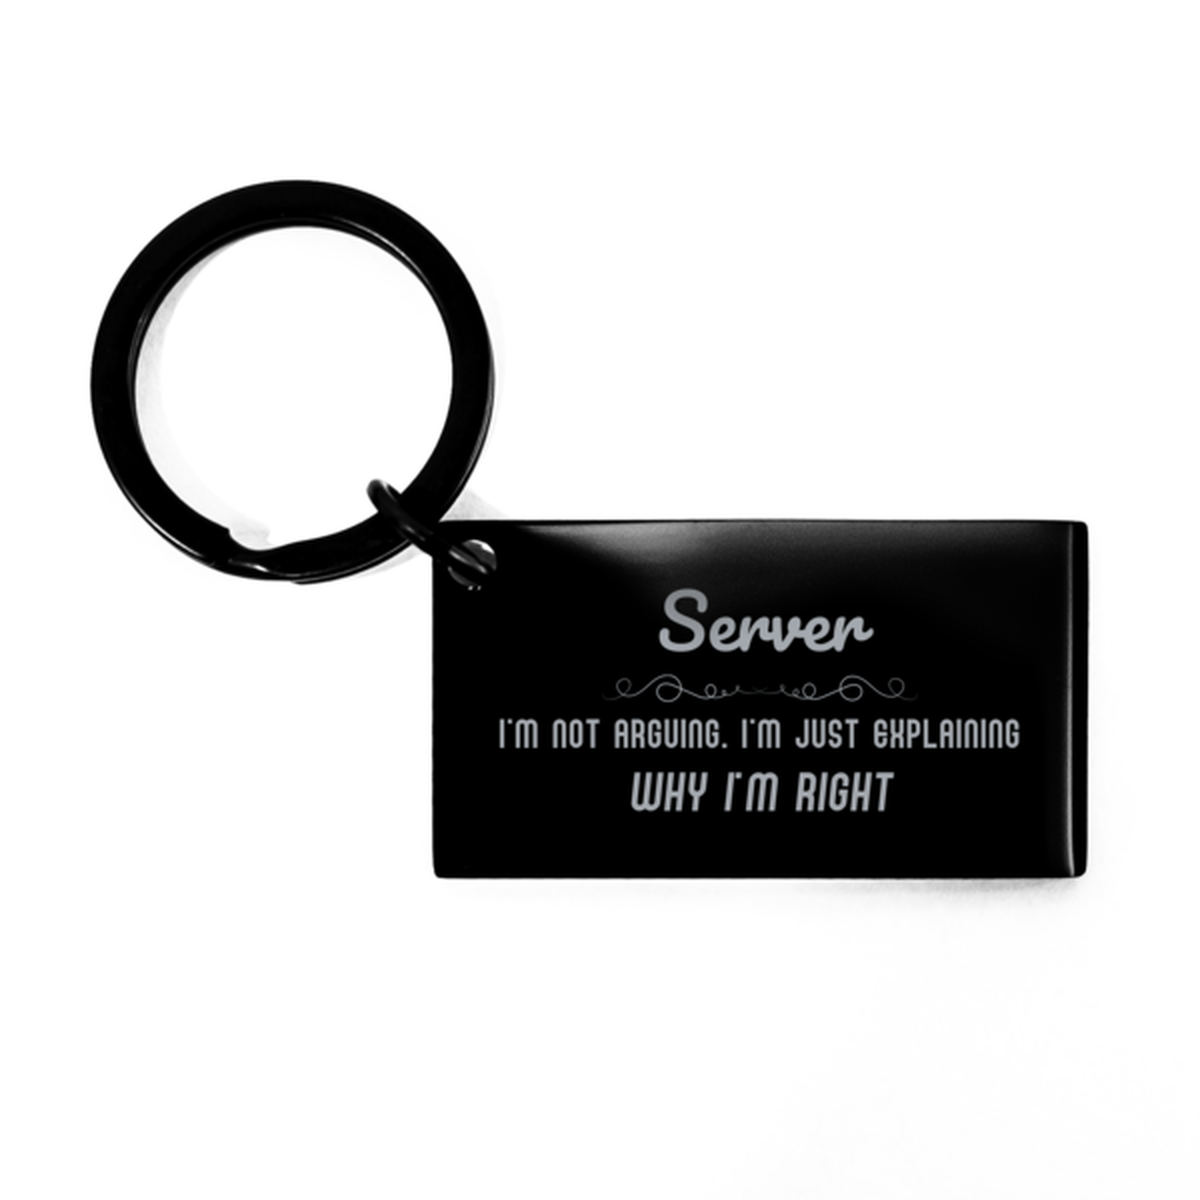 Server I'm not Arguing. I'm Just Explaining Why I'm RIGHT Keychain, Funny Saying Quote Server Gifts For Server Graduation Birthday Christmas Gifts for Men Women Coworker